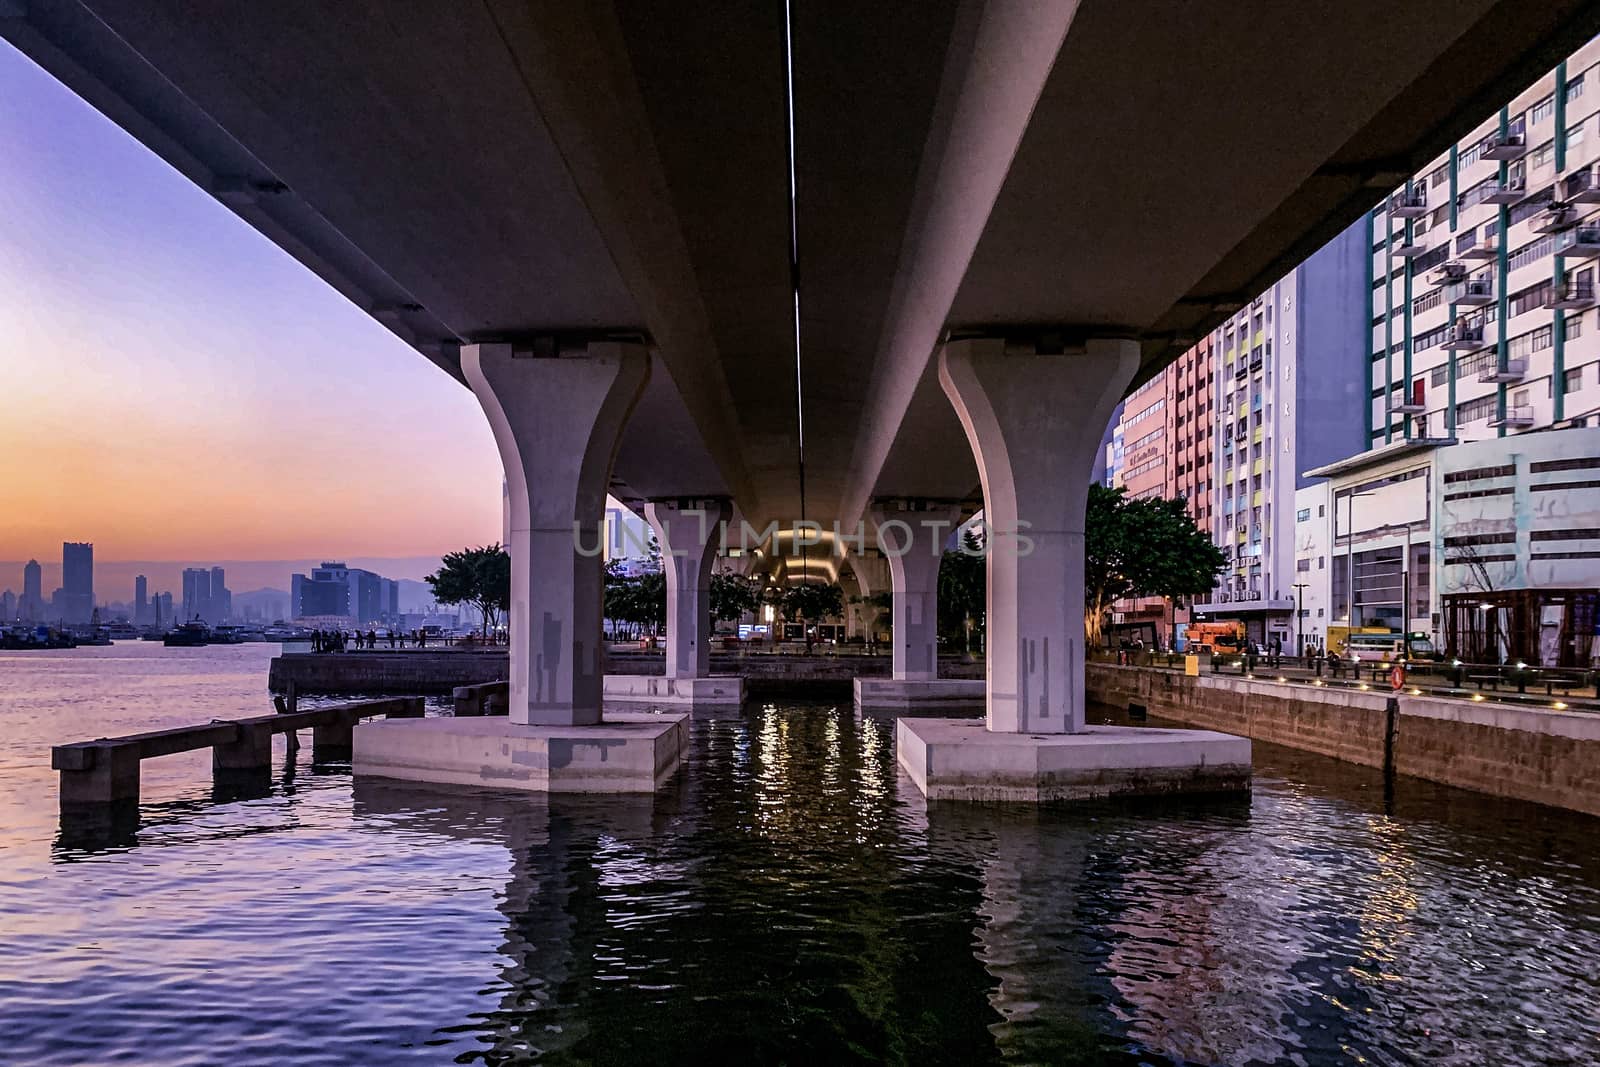 The outdoor park underneath car bridge near the Hong Kong river in downtown district at sunset